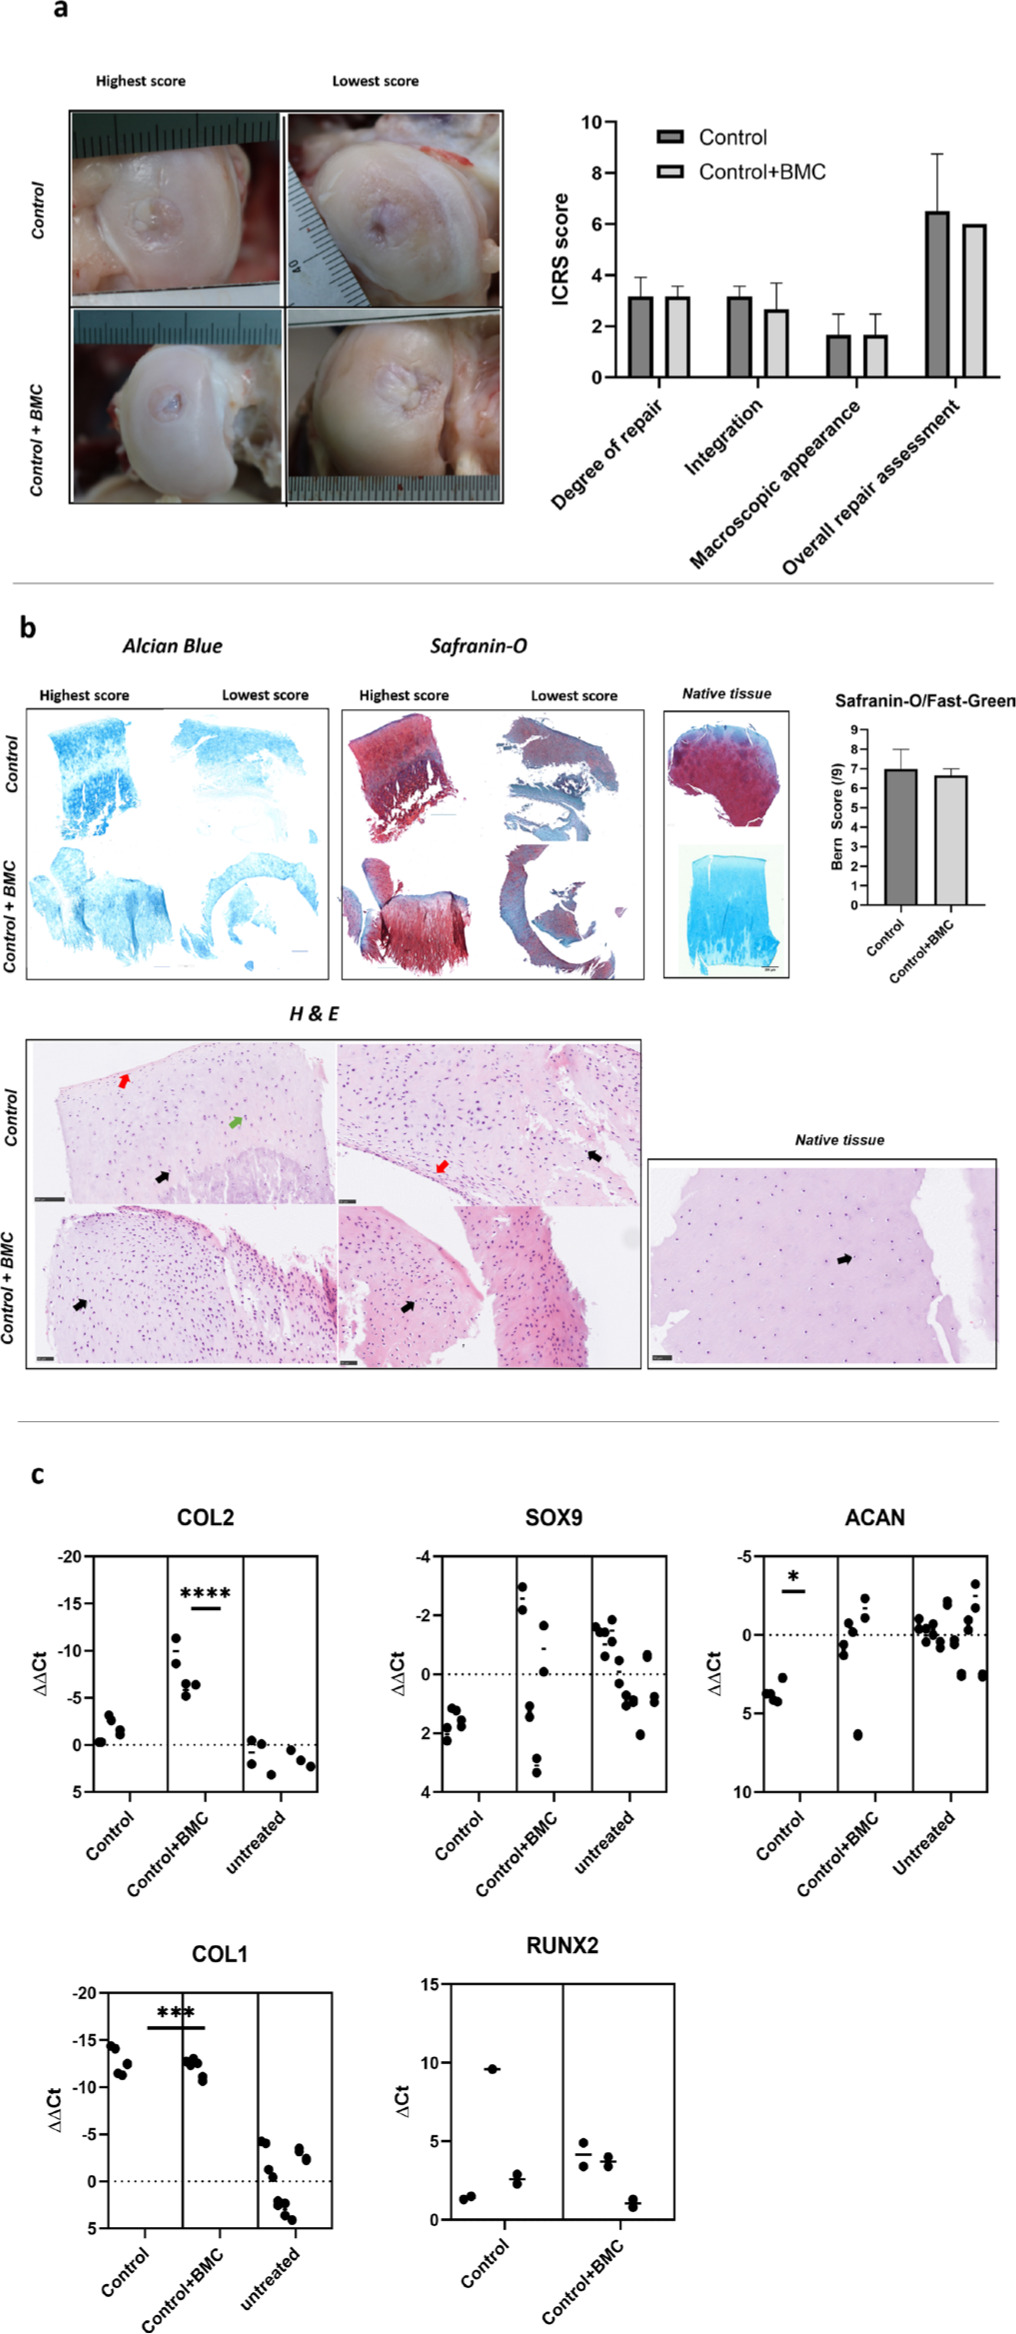 Fig. 4 
            Evaluation of regenerated cartilage at six months: a) Gross view and macroscopic evaluations showing best and worst cases in each group. ICRS, International Cartilage Regeneration & Joint Preservation Society (ICRS) scoring did not show any macroscopic differences between control and bone marrow concentrate (BMC) groups. b) Histology (alcian blue, Safranin-O, and haematoxylin and eosin (H&E) staining), with best and worst repair tissues shown in each case. Bern score evaluation of Safranin-O staining showed no statistically significant difference between the groups. H&E staining shows chondrocytes in their lacunae (black arrow) in both groups. Flattened chondrocytes (red arrow) and dividing chondrocytes (green arrow) are shown. No inflammatory response in form of mononuclear cell infiltration was observed, however, compared to healthy hyaline cartilage more cells were present in both groups. c) Chondrogenic and osteogenic gene expression analysis. Upregulation of type II collagen (COL2) in the BMC group, and downregulation of aggrecan (ACAN) in the control group. COL1 was upregulated and RUNX2 was expressed in both groups. All comparisons are with untreated normal cartilage indicated as “untreated” in the graph. Ct corresponds to cycle threshold. Scale bar = 200 μm (alcian blue and Safranin-O), 50 μm (H&E). Error bars: standard error of means.
          